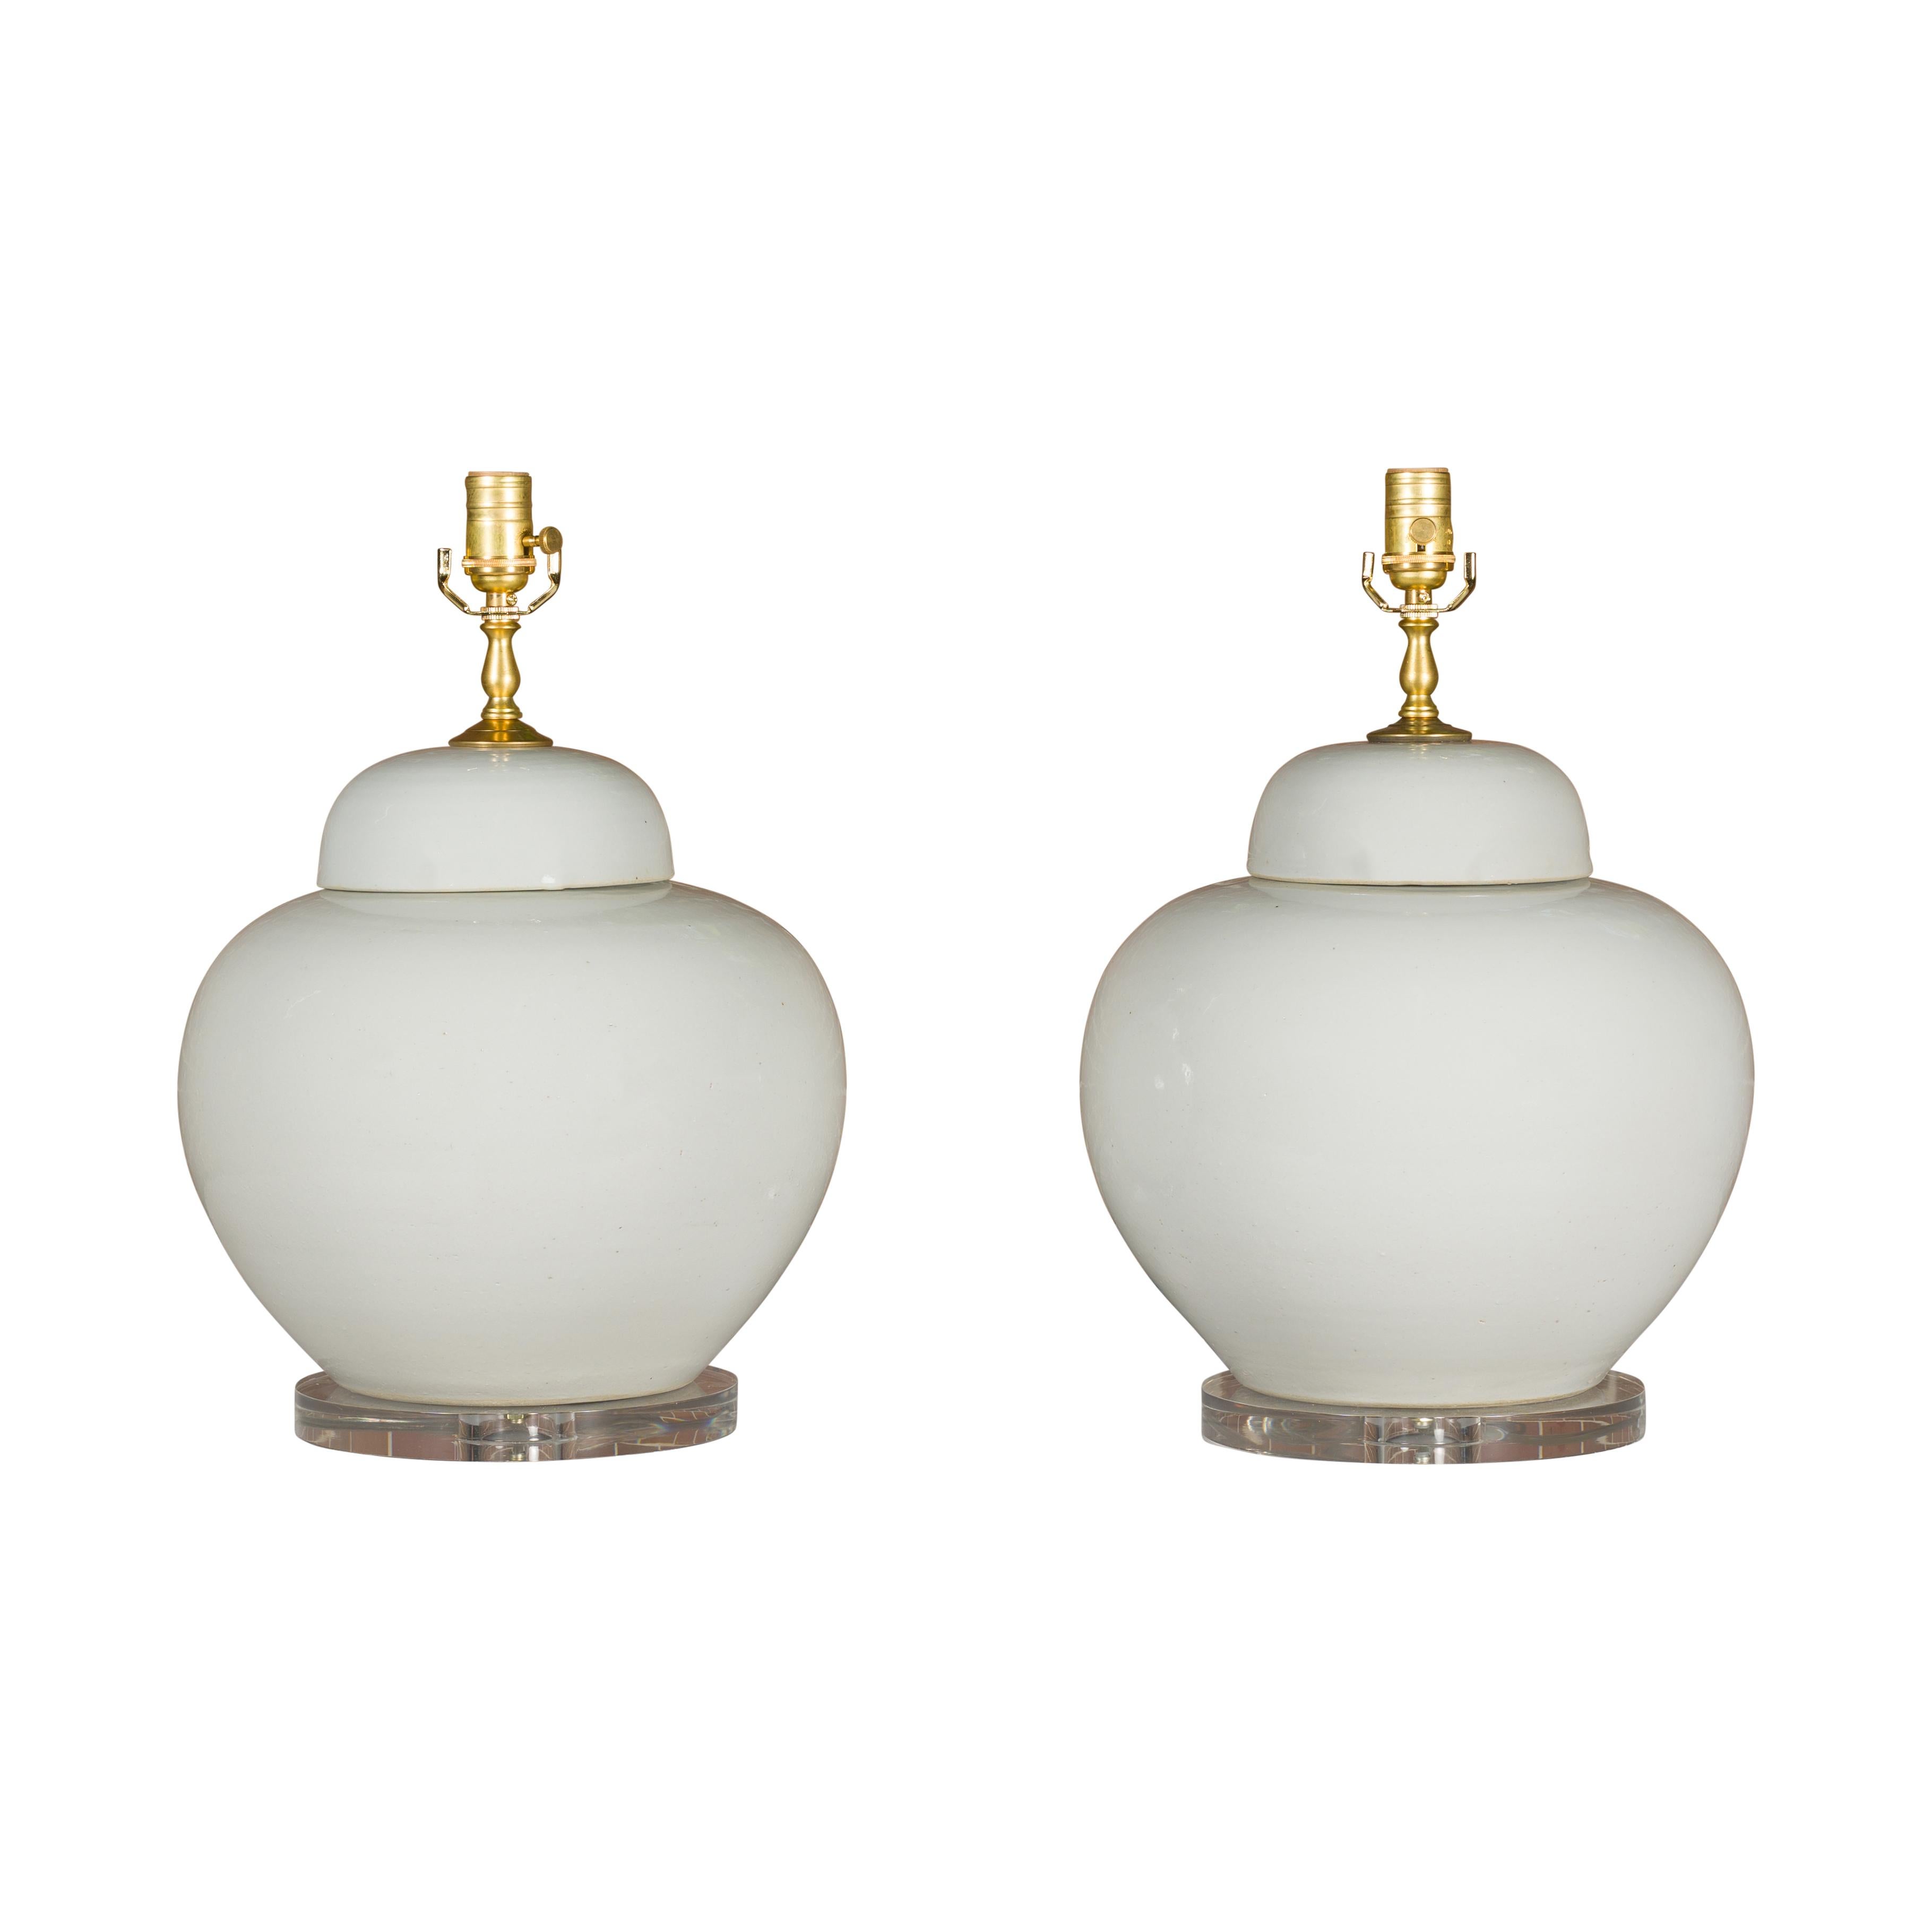 White Porcelain Lidded Urns Made into Wired Table Lamps on Lucite Bases, a Pair For Sale 9